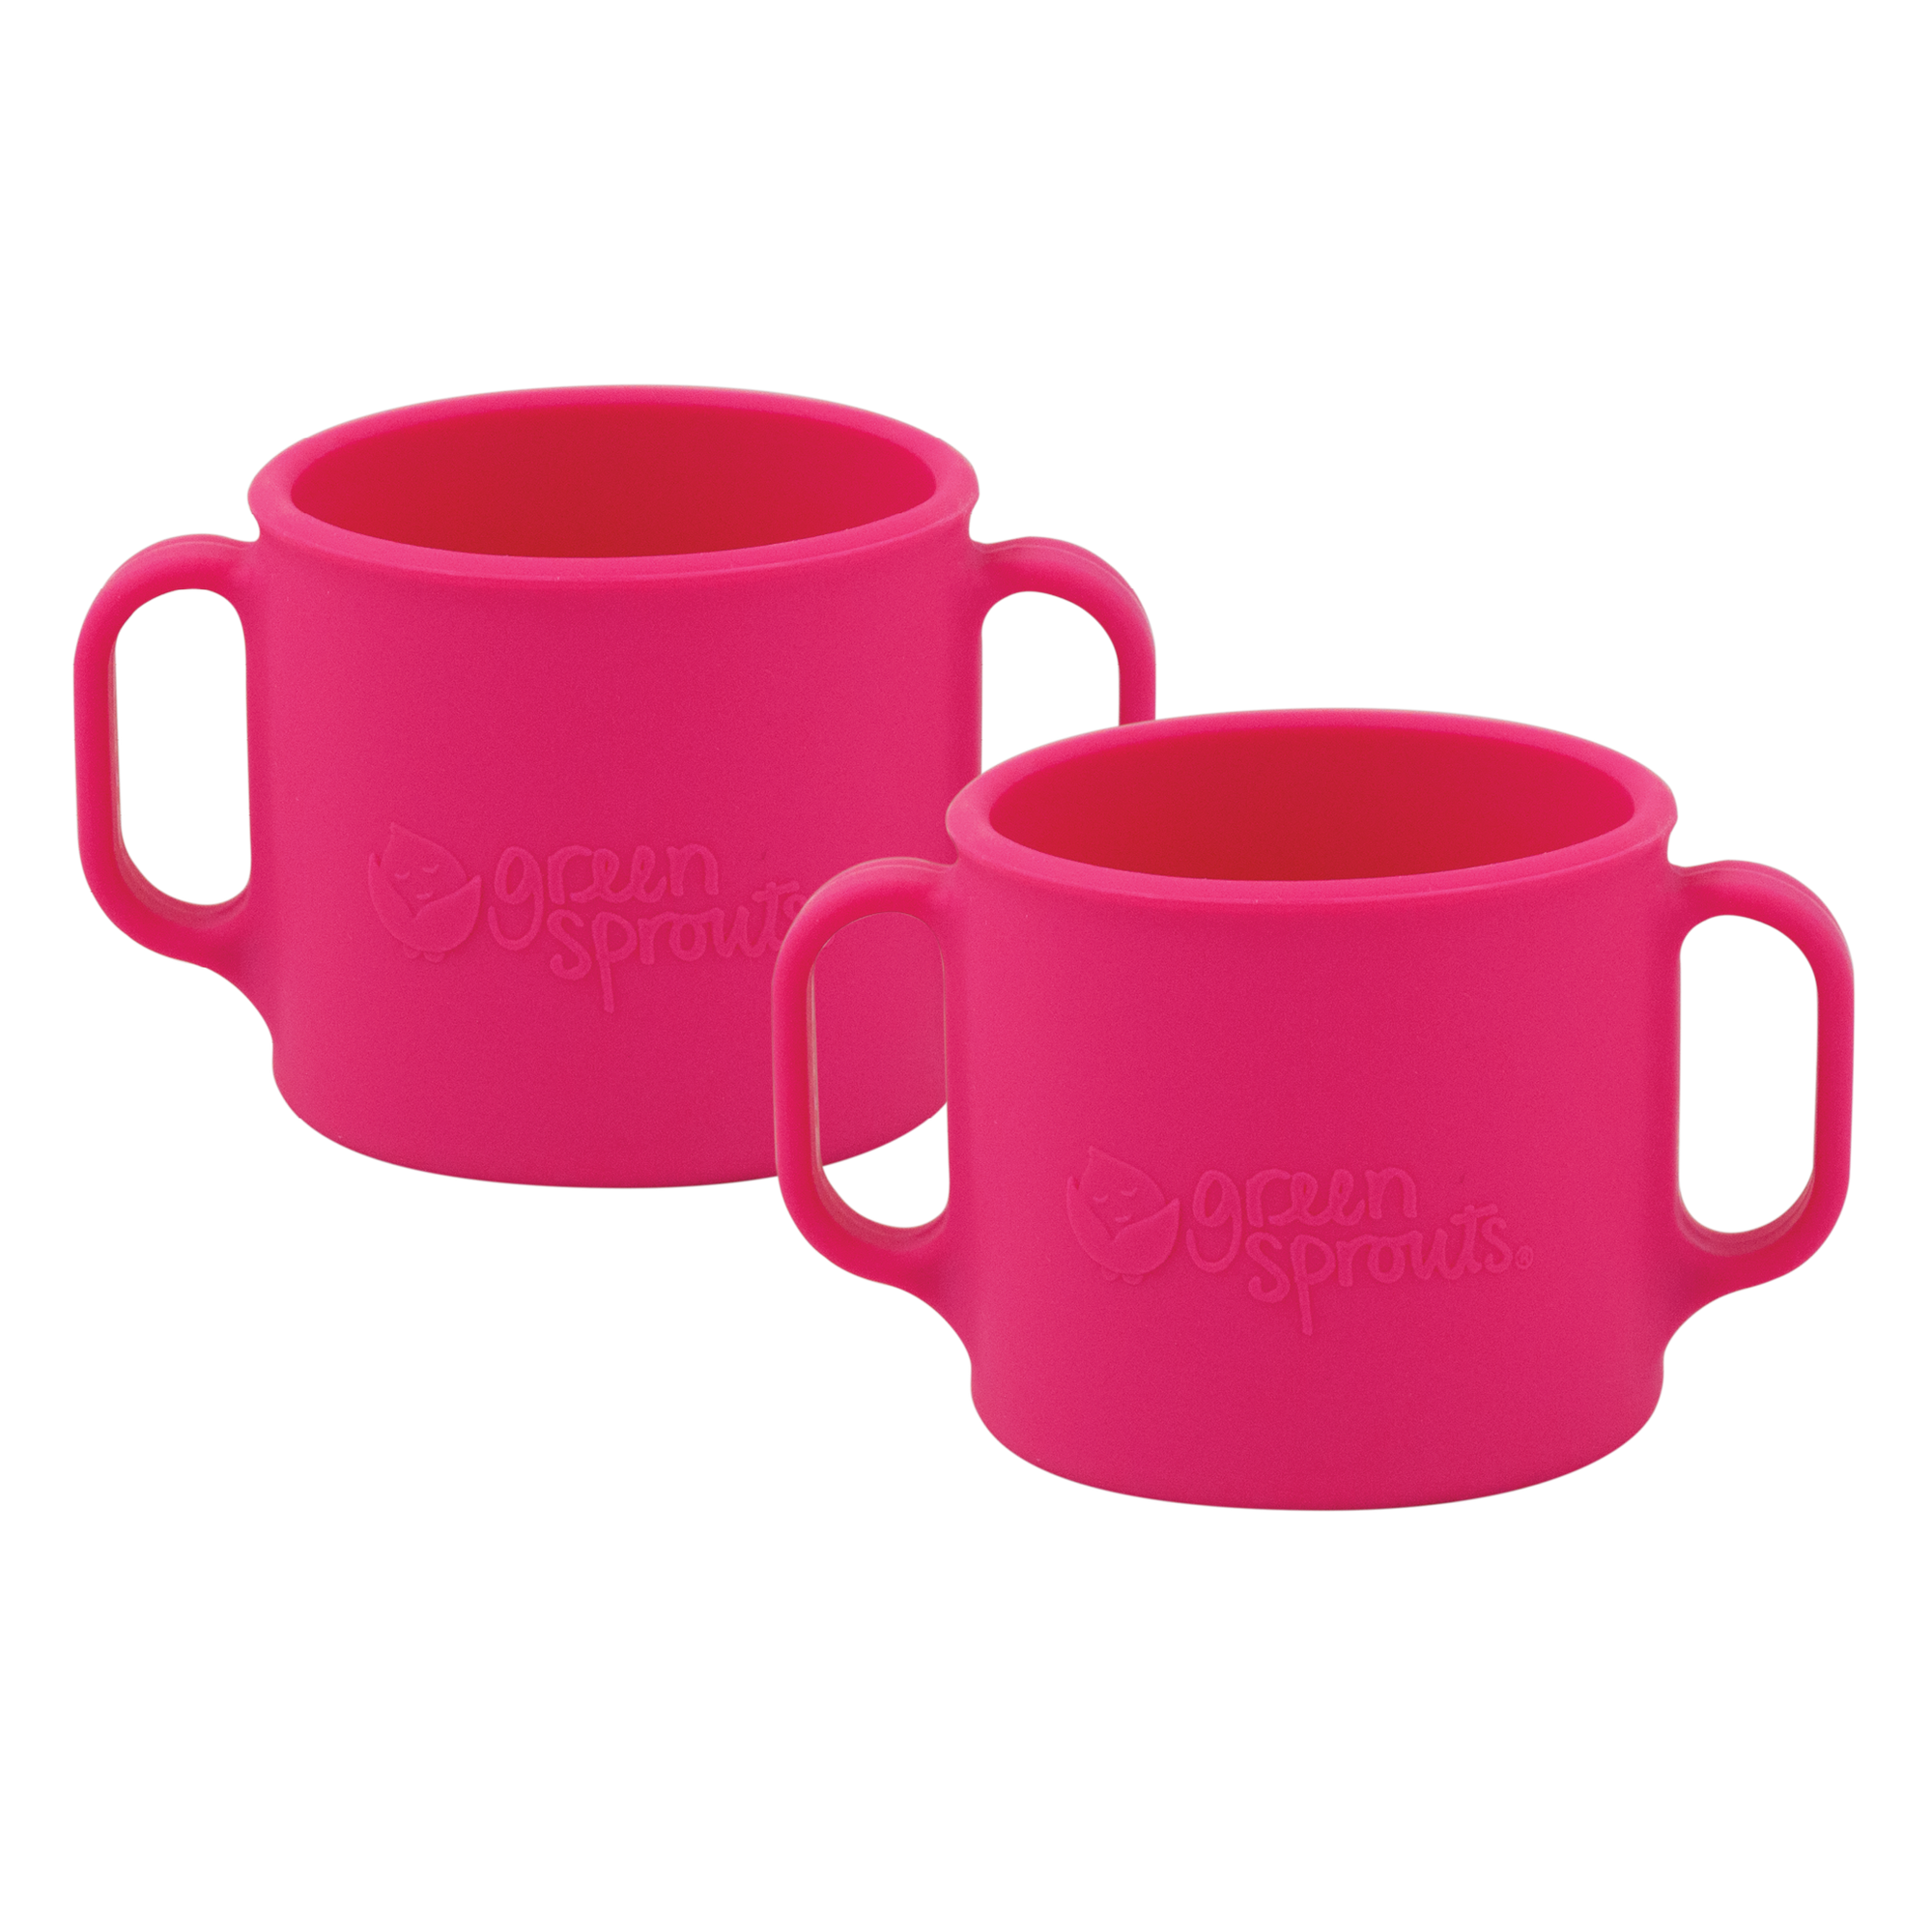 Learning Cup made from Silicone (2 pack)